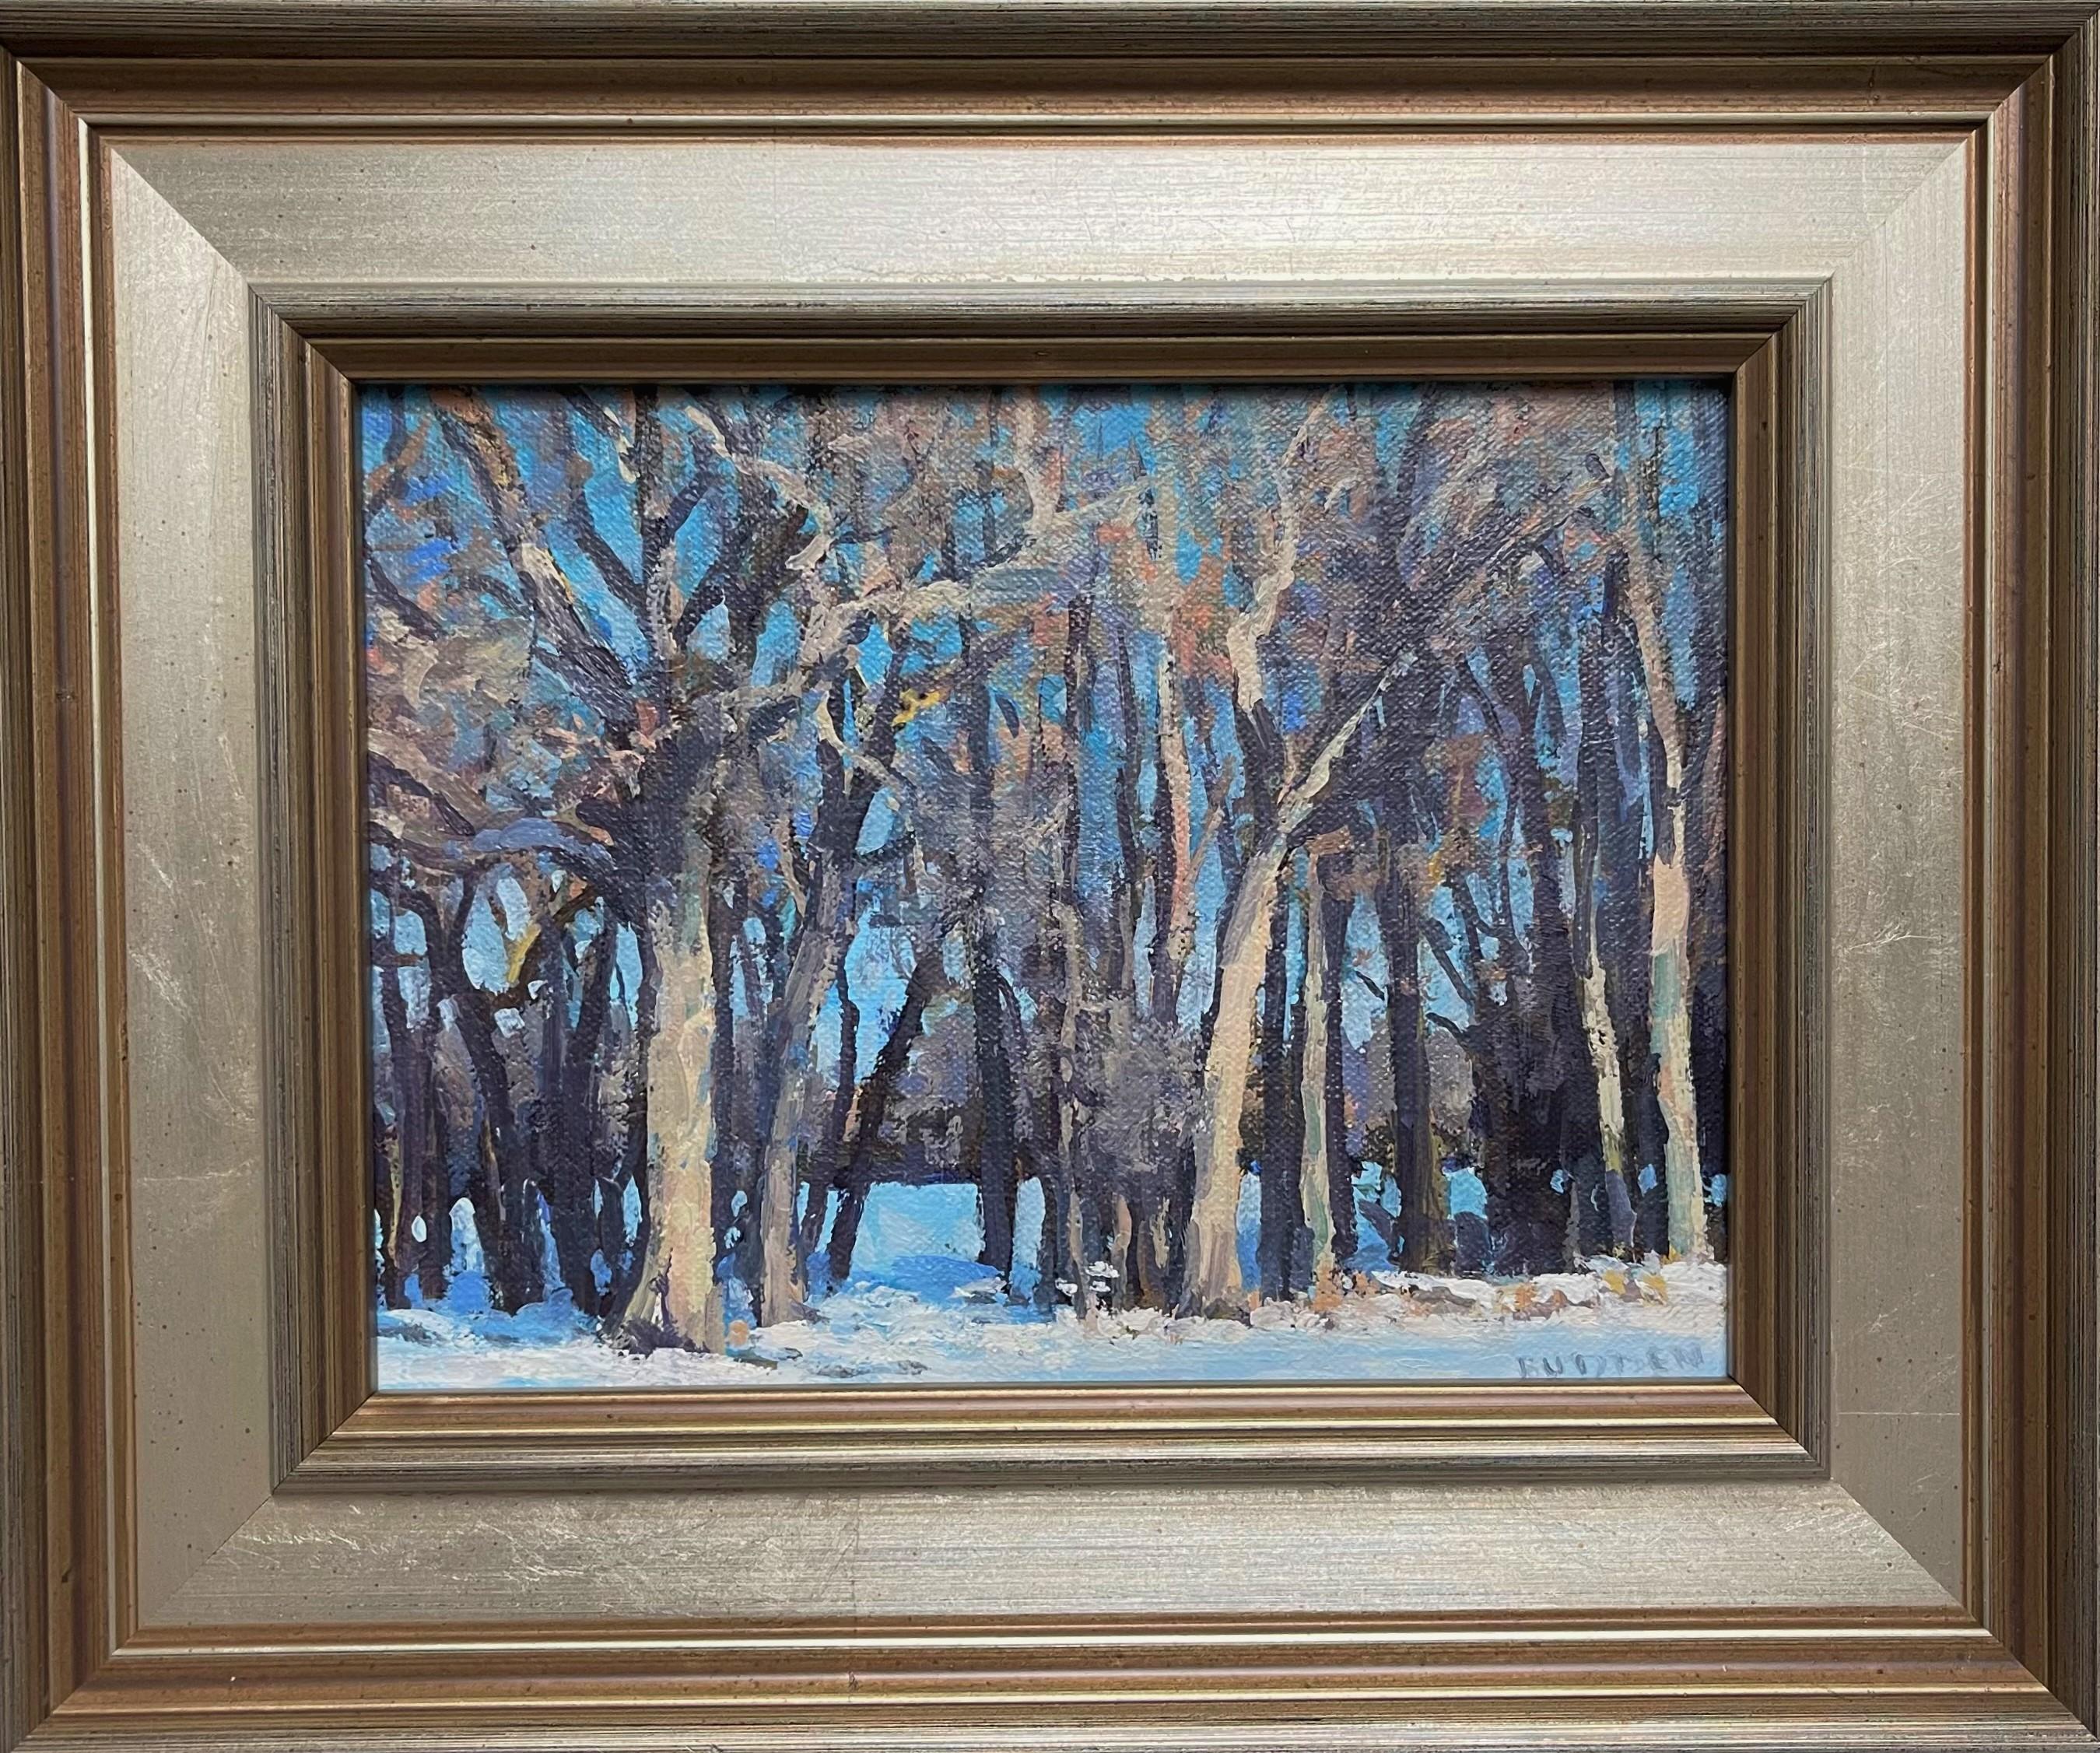 Winter Tree Study I
oil/canvas panel
6 x 8 image
I enjoy playing with light in my paintings and creating a mood while trying to push the range of color using subtle transitions like in the snow here in this winter scene. 
The frame has an aged